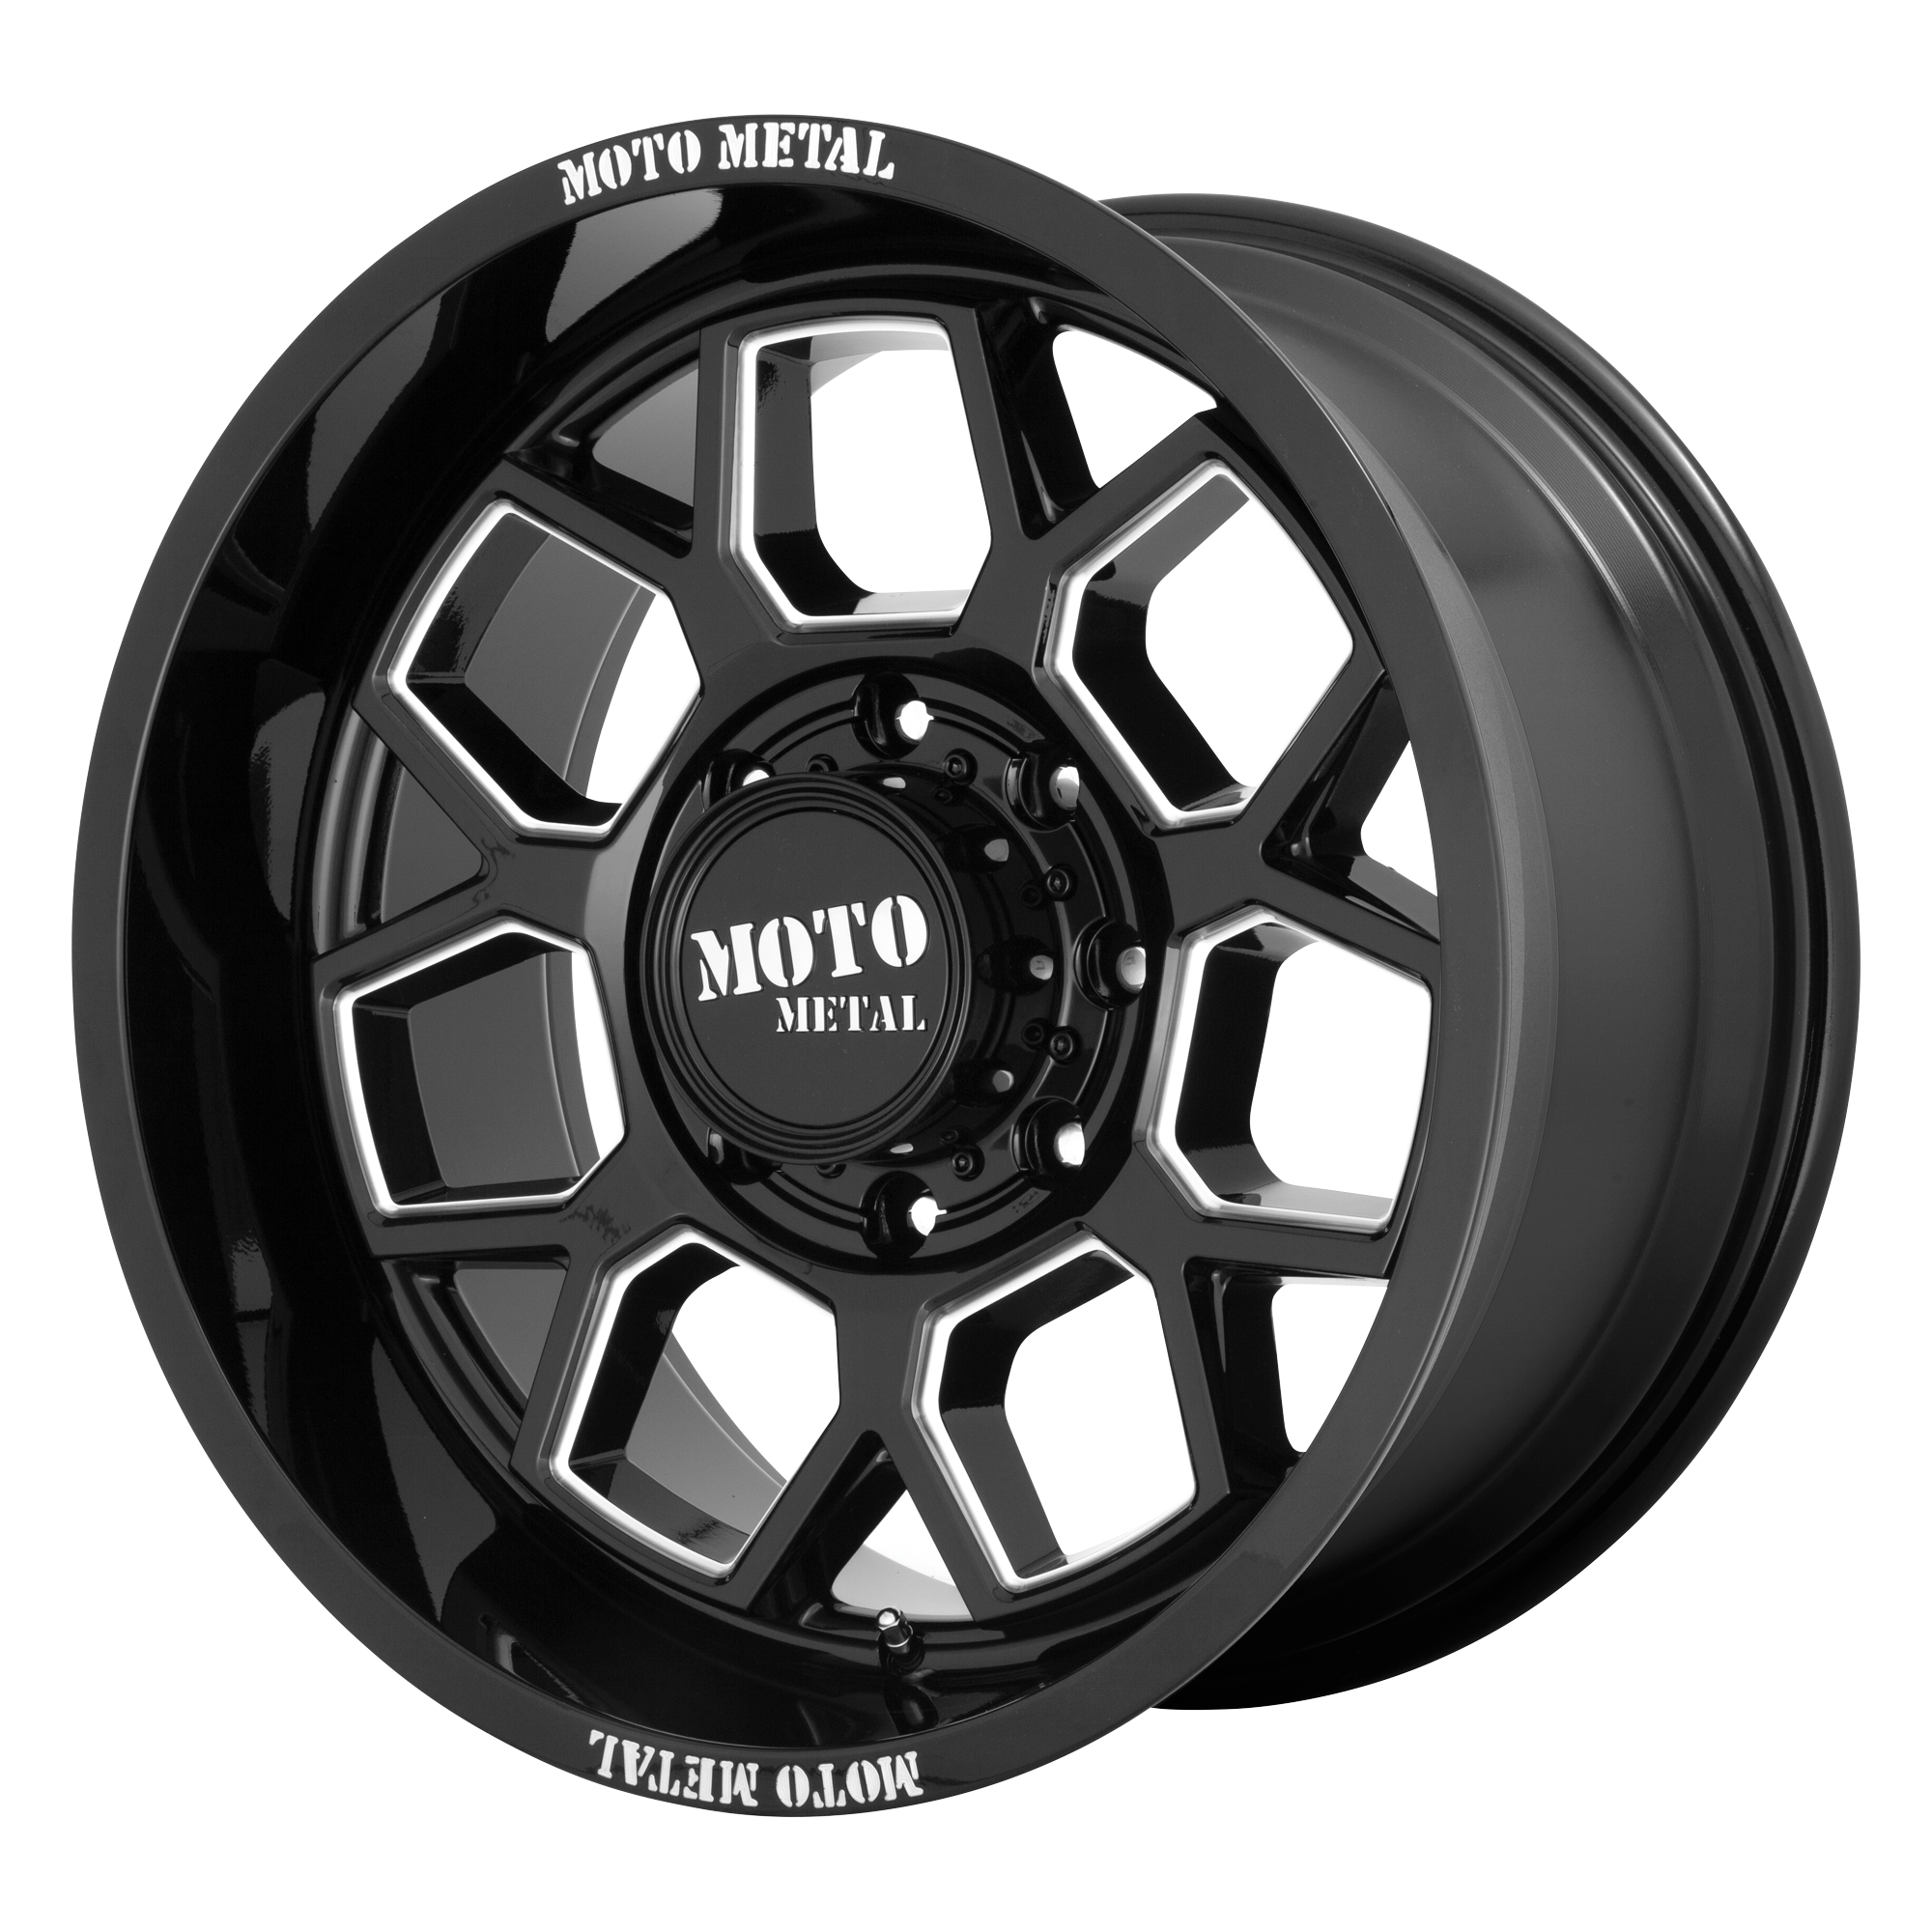 BANSHEE 20x10 6x135.00 GLOSS BLACK MILLED (-18 mm) - Tires and Engine Performance